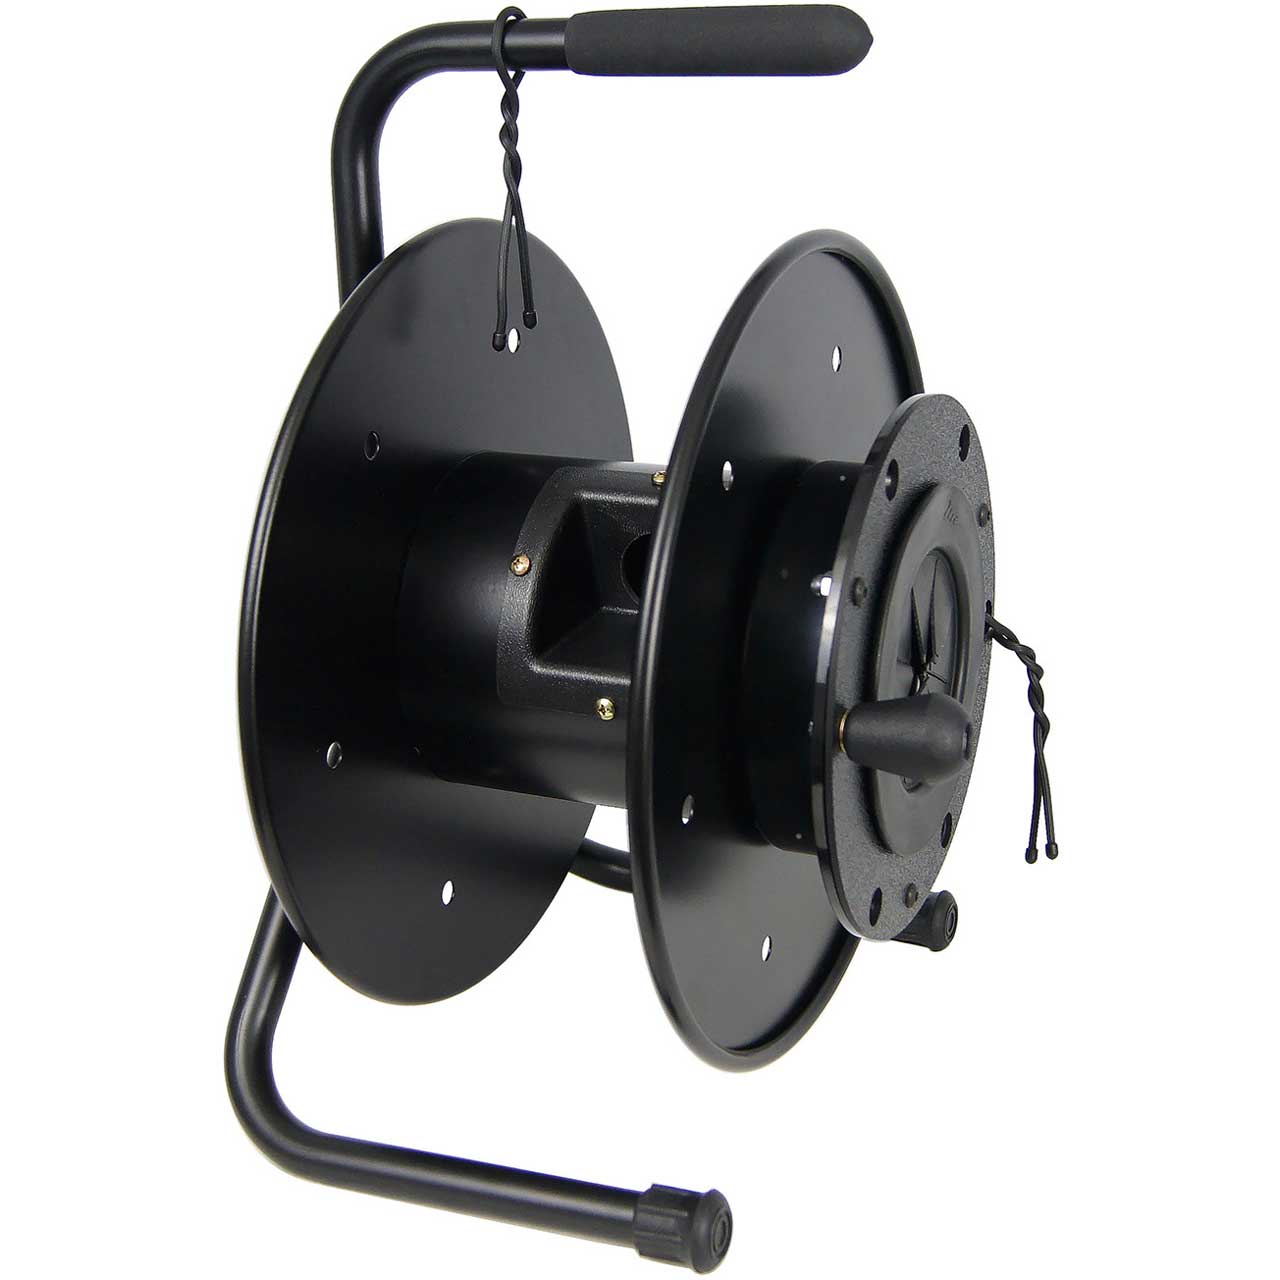 Hannay Reels AVF-14 Fiber Optic Series Metal Cable Reel for up to